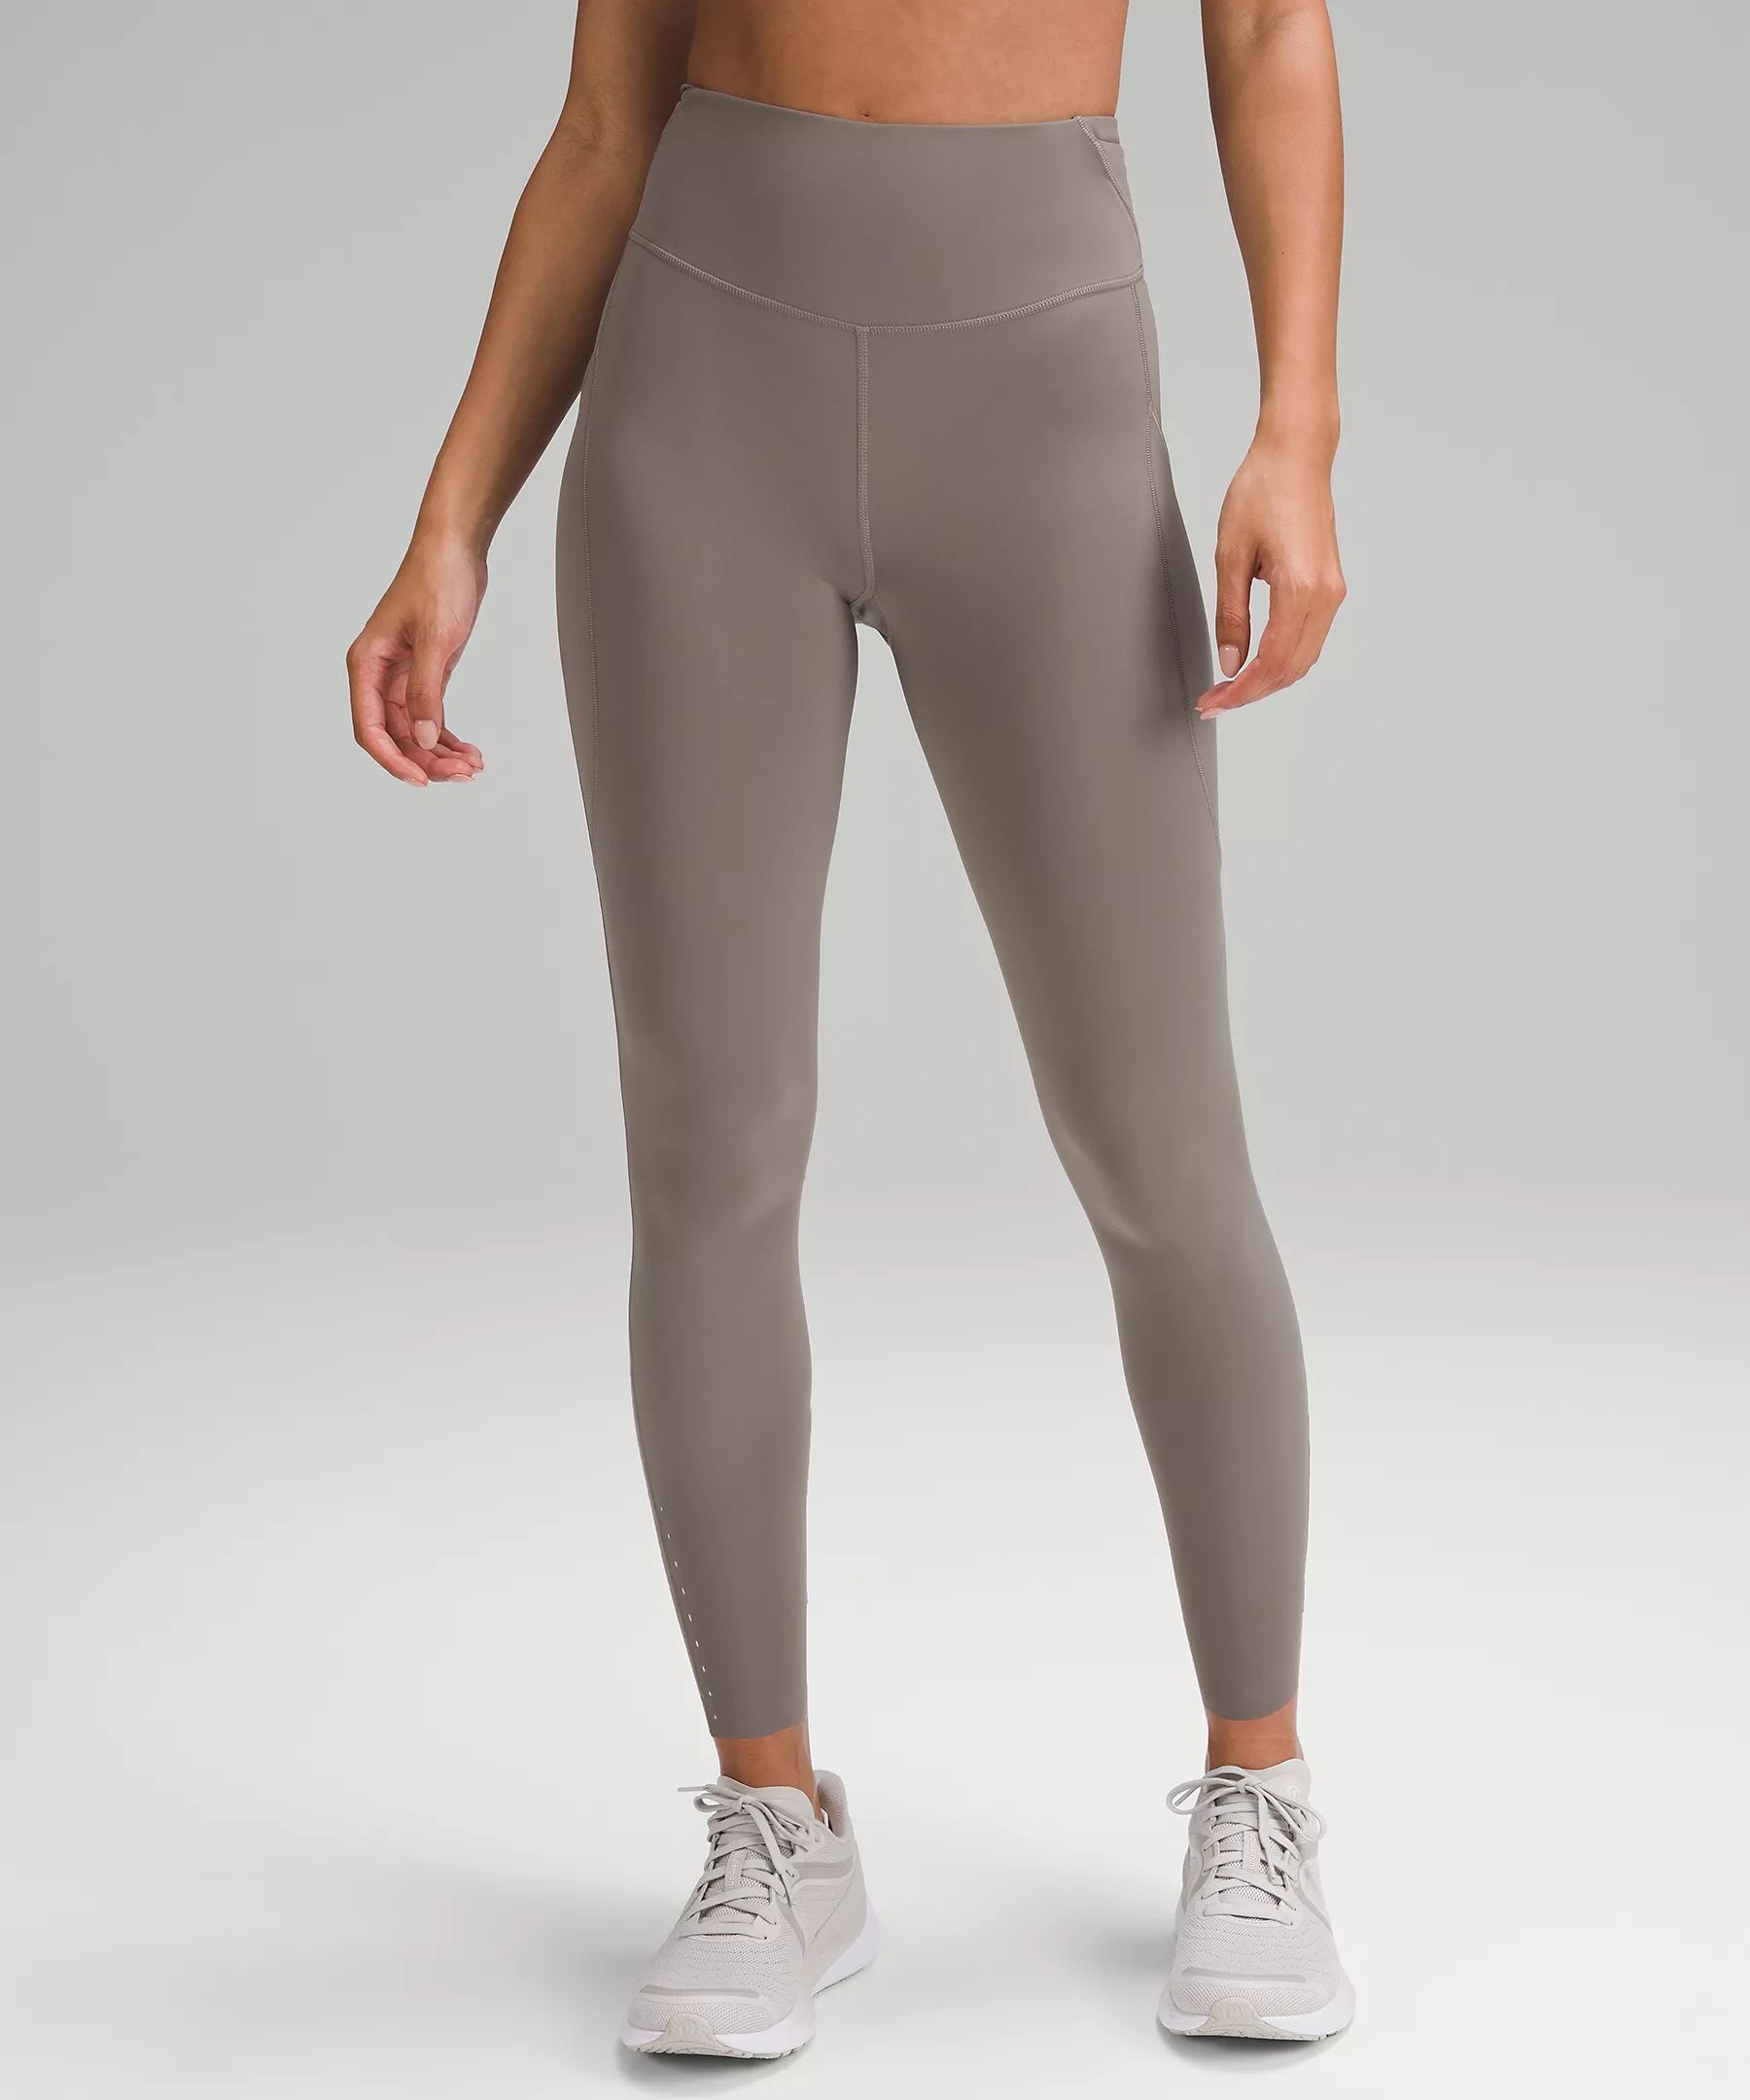 Fast and Free High-Rise Tight 25” Pockets *Updated | Women's Leggings/Tights | lululemon | Lululemon (US)